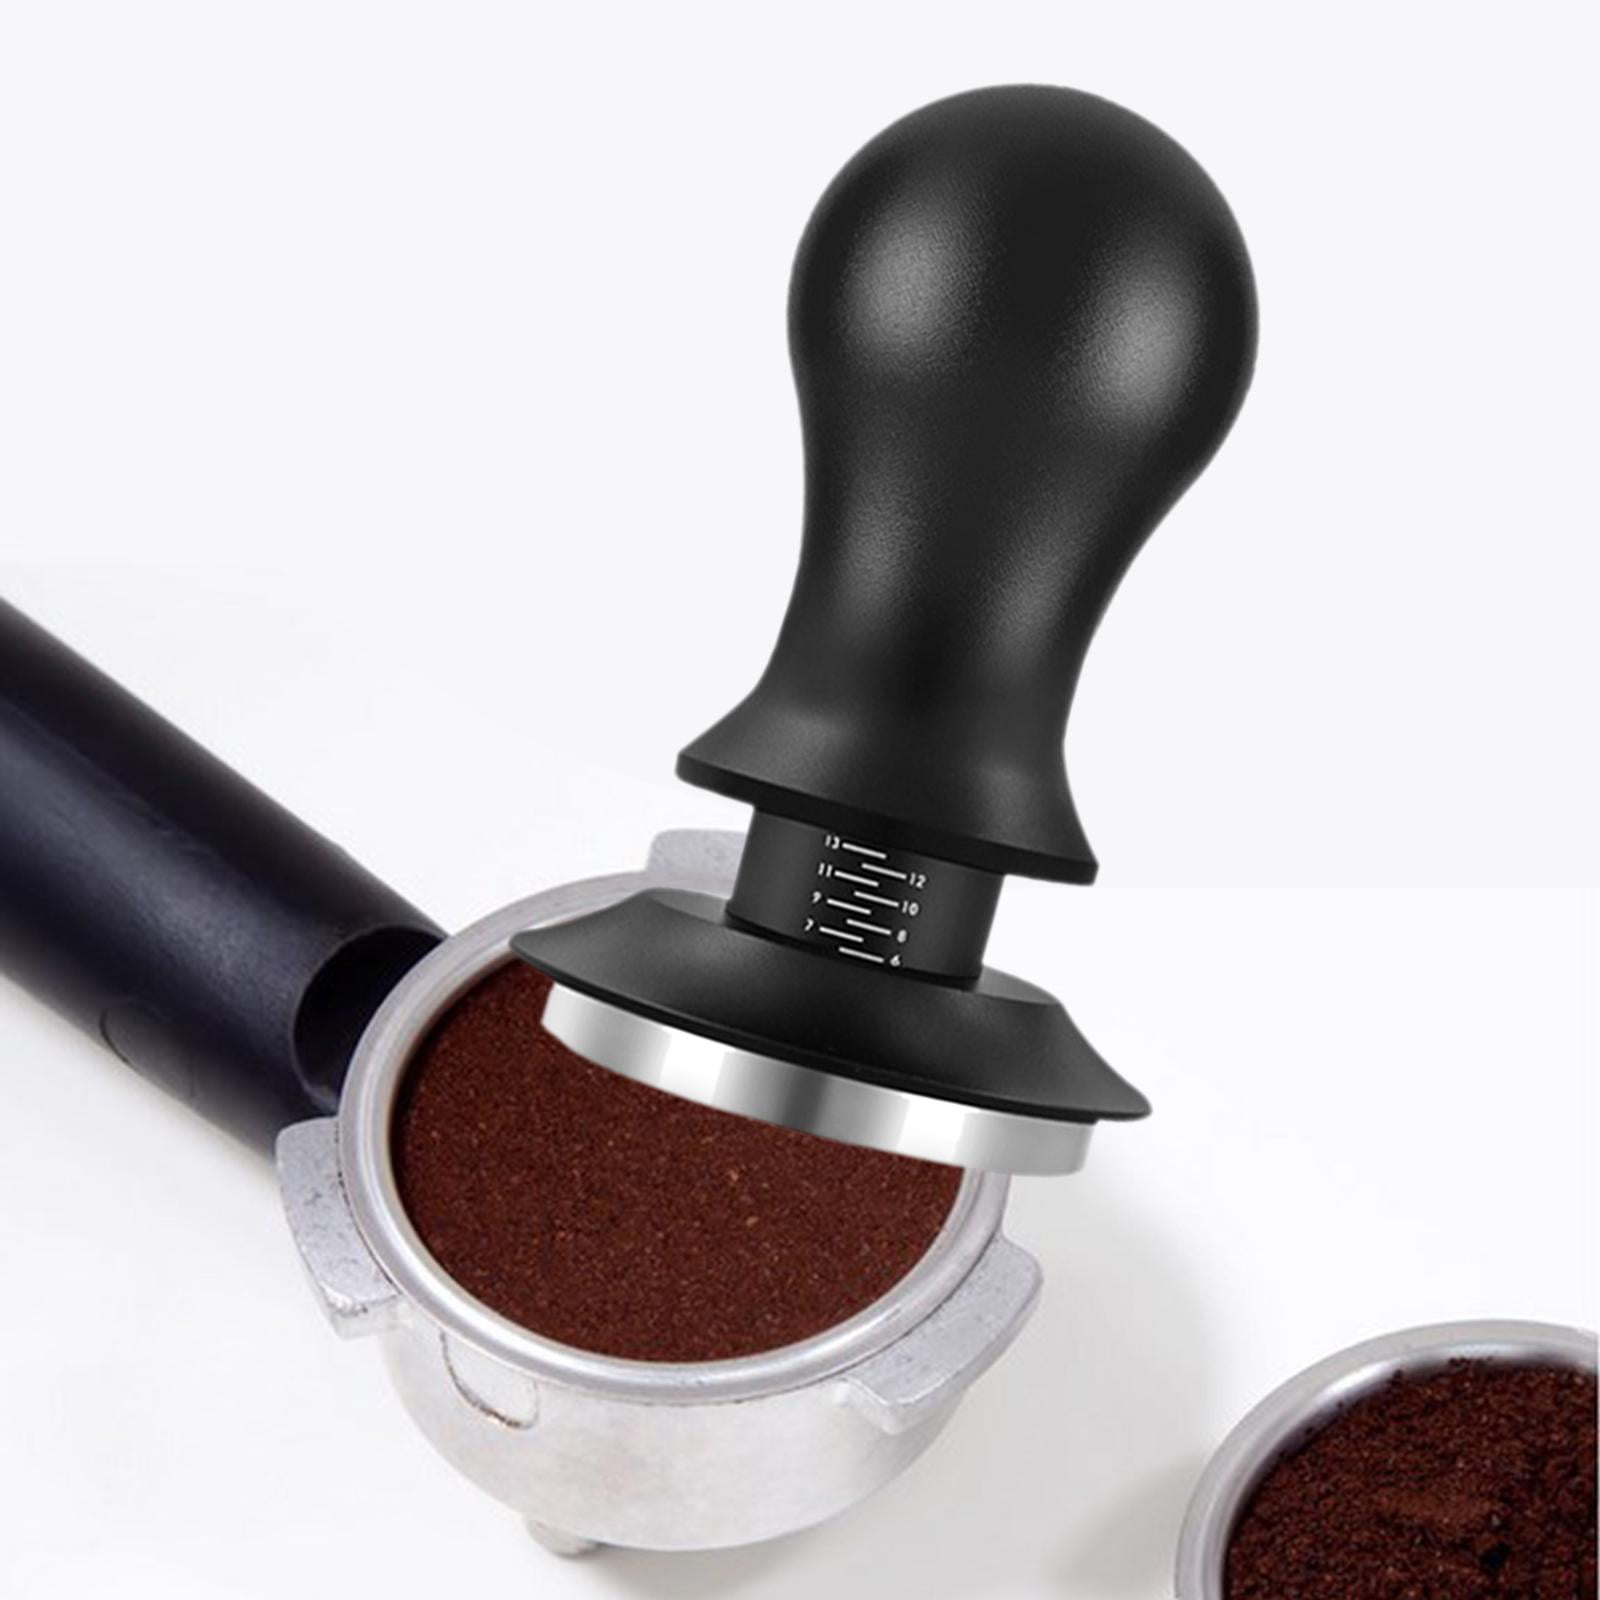  COMFEELING Espresso Coffee Stirrer Powder Stirring Distribution  Tool & Coffee Tamper Hand Grounds Tamping Presser Family Office Cafe Barista  Tools Espresso Coffee Making Kit : Home & Kitchen